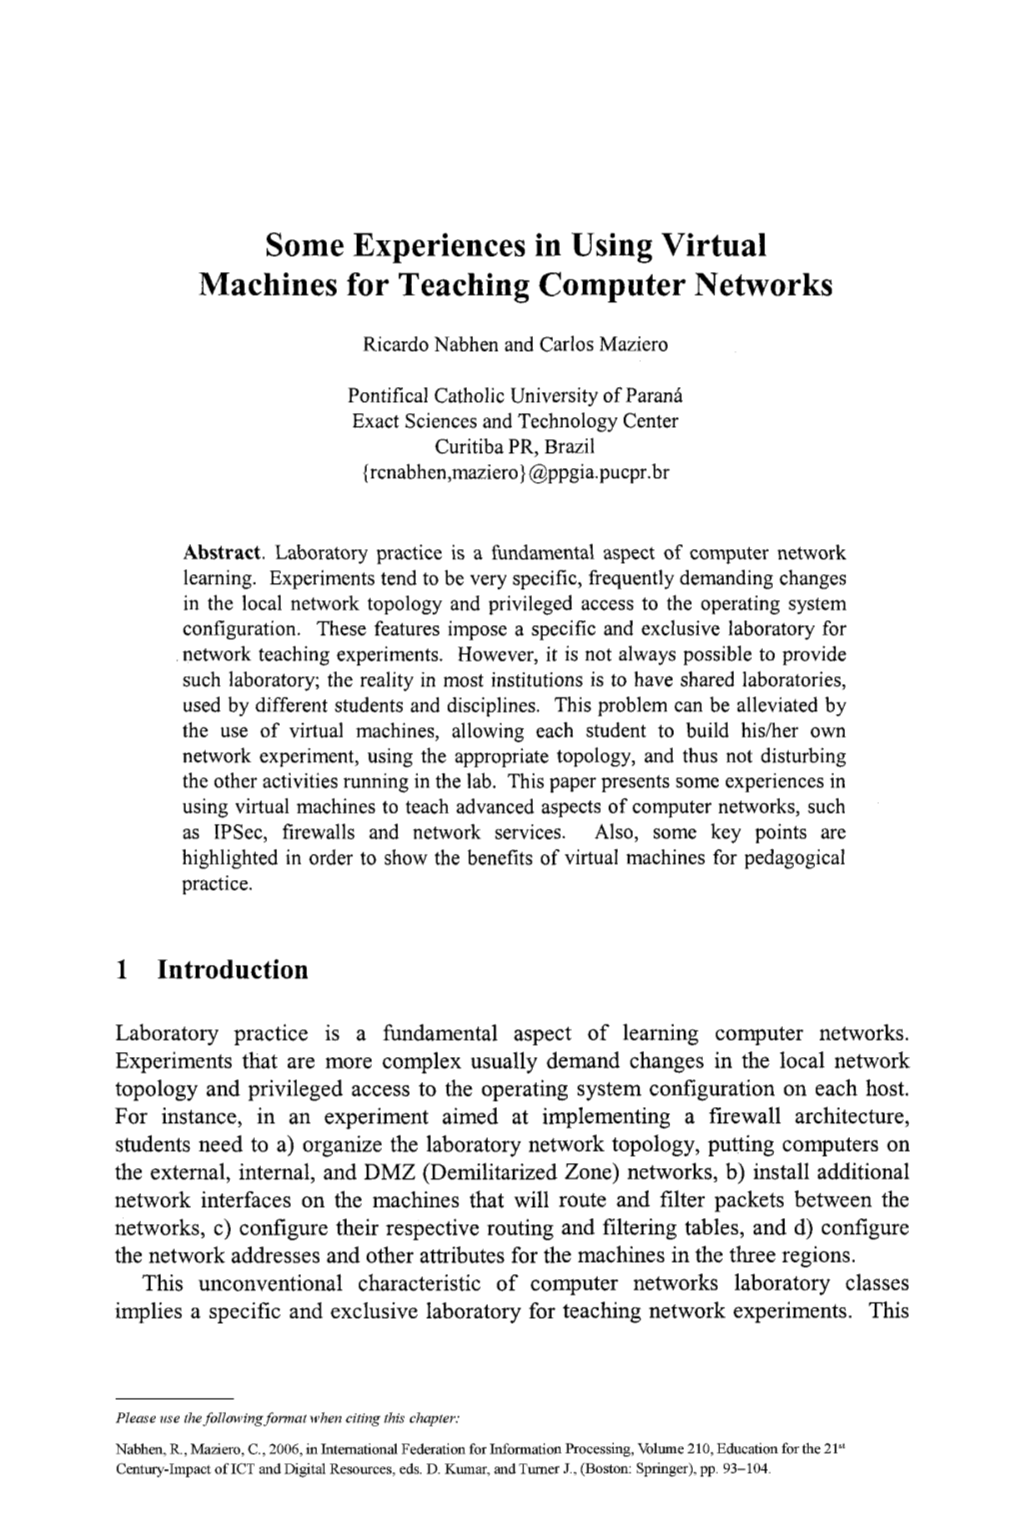 Some Experiences in Using Virtual Machines for Teaching Computer Networks